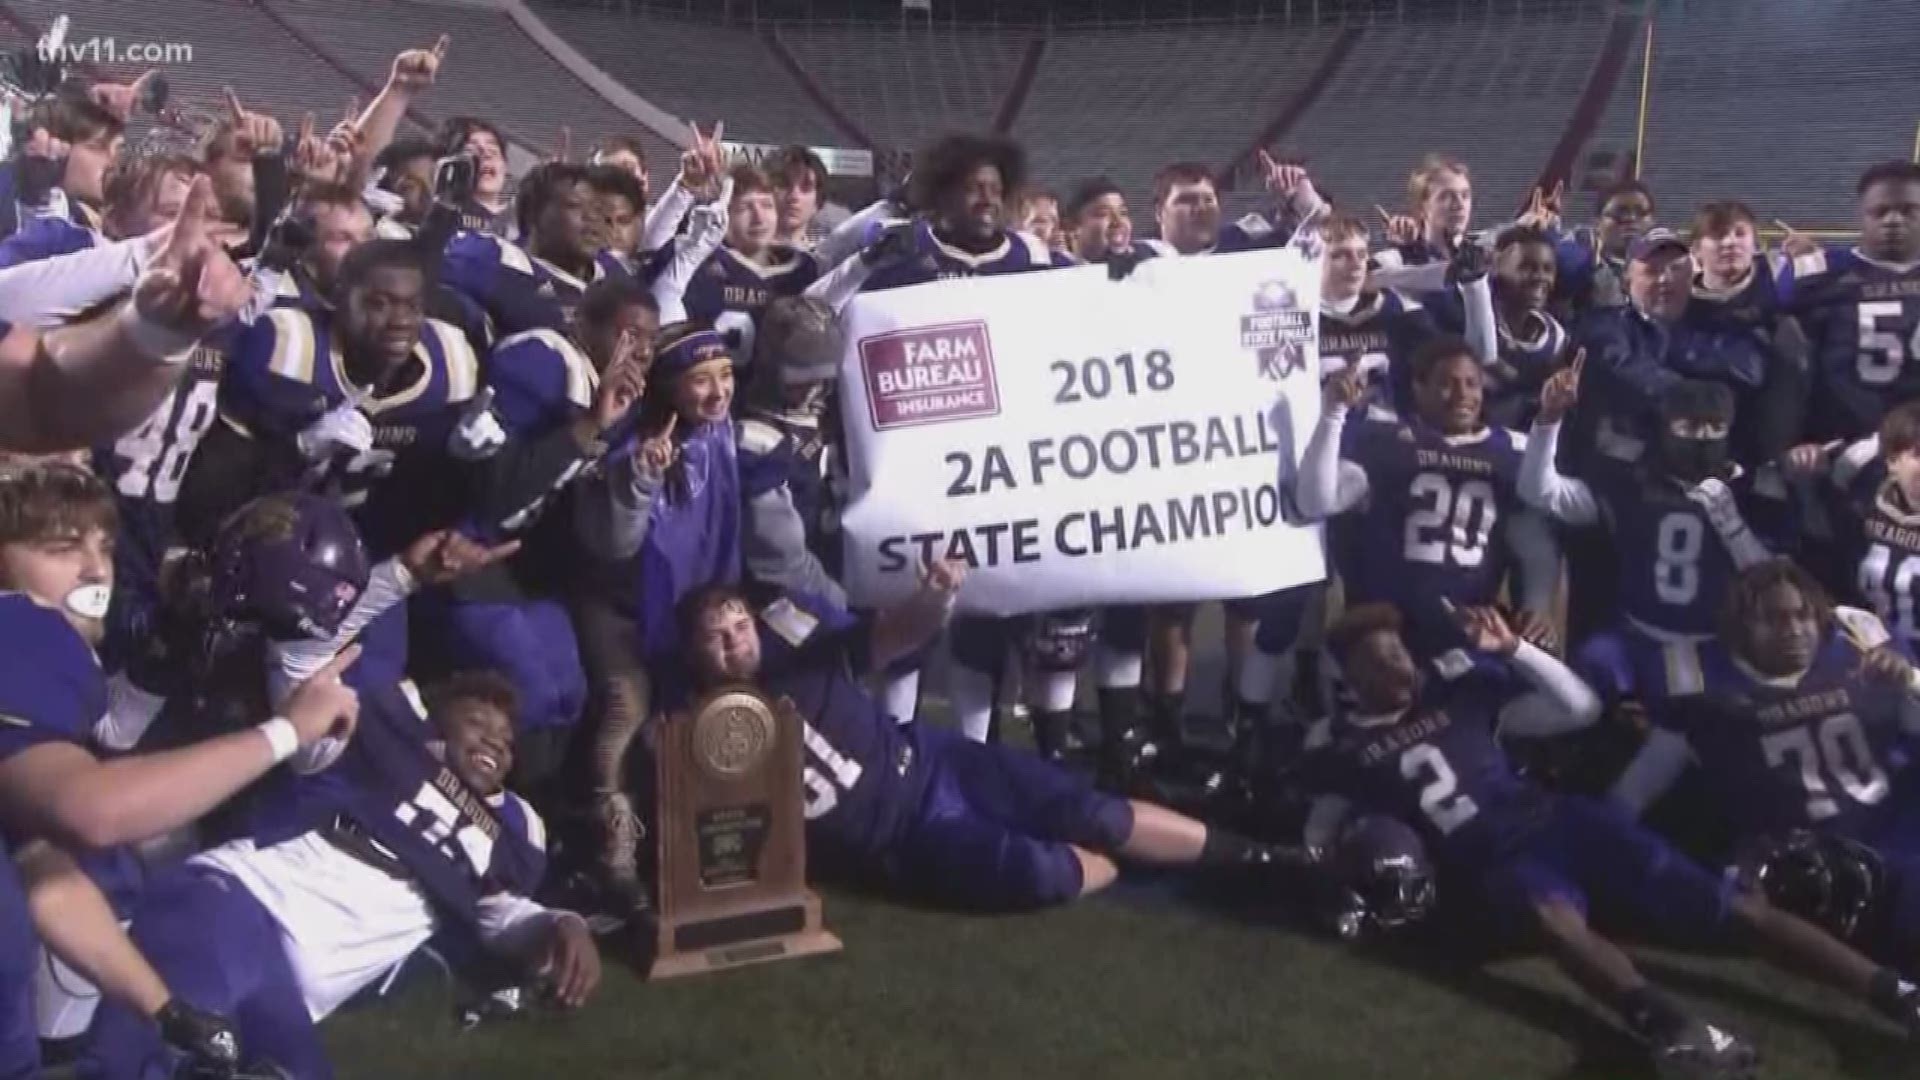 Junction City uses 2nd half comeback to win 2A title over Hazen